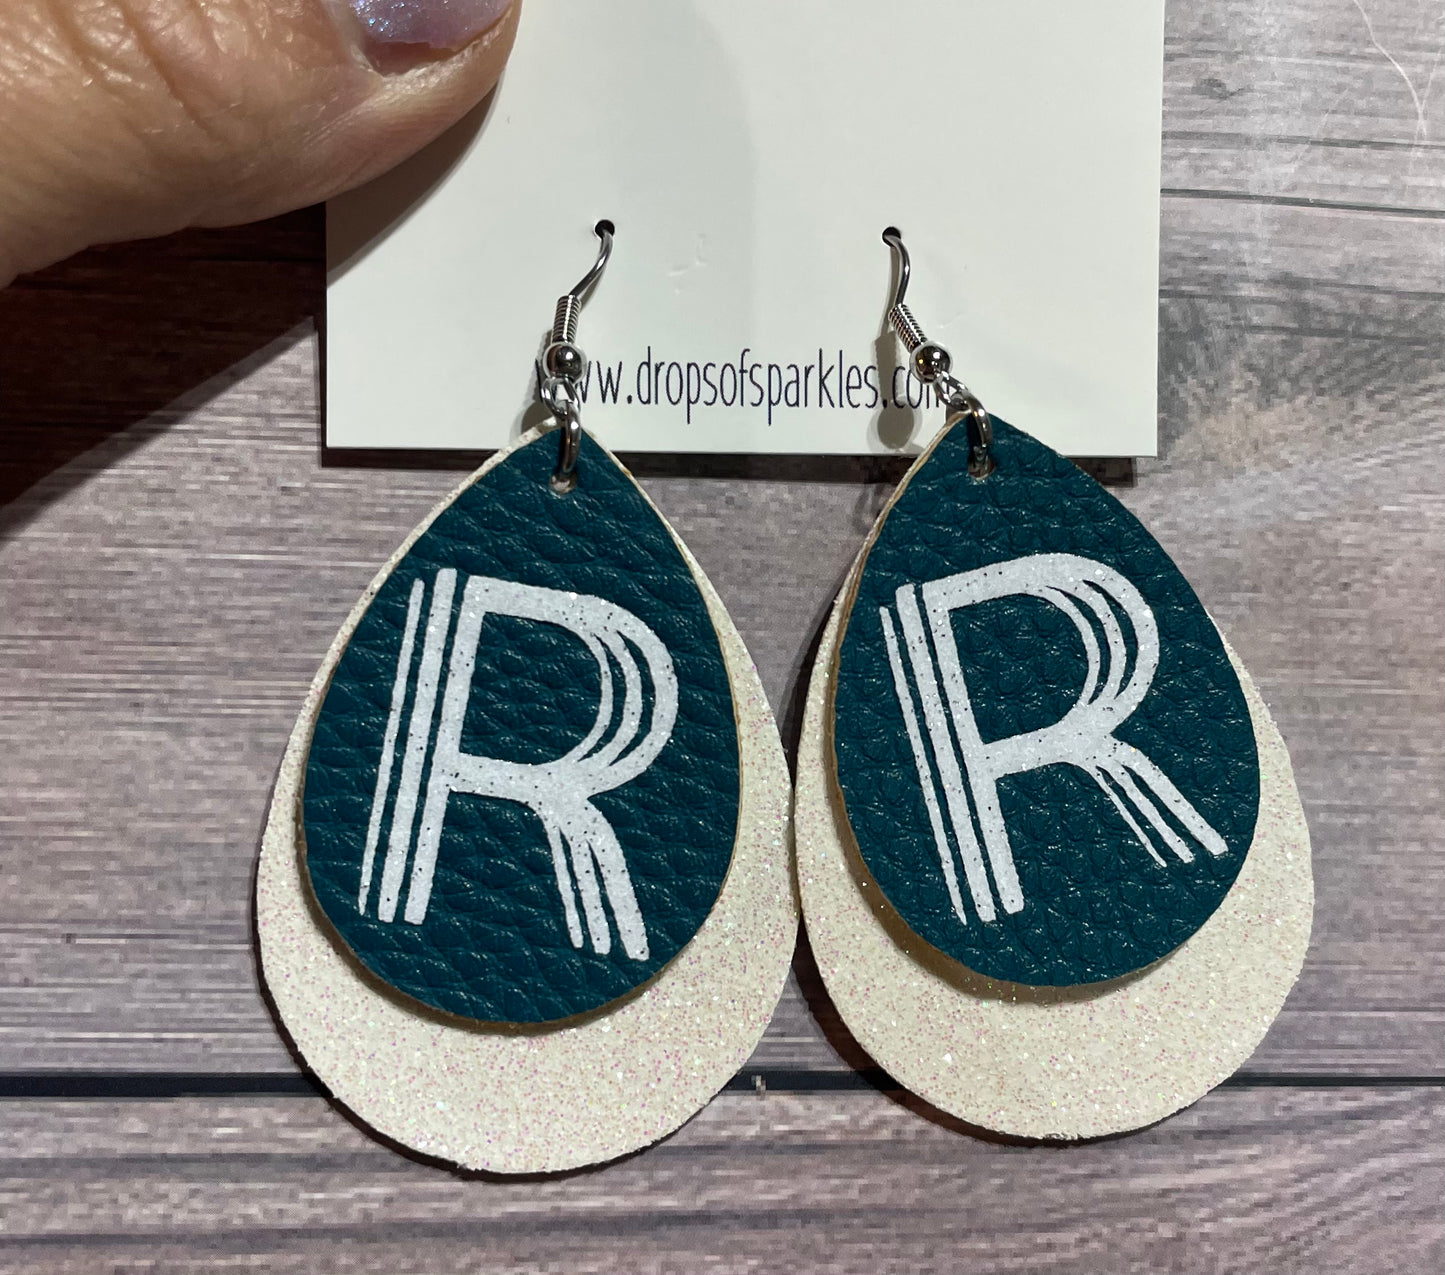 CUSTOM ORDER: 2 layer custom made faux leather earrings with vinyl